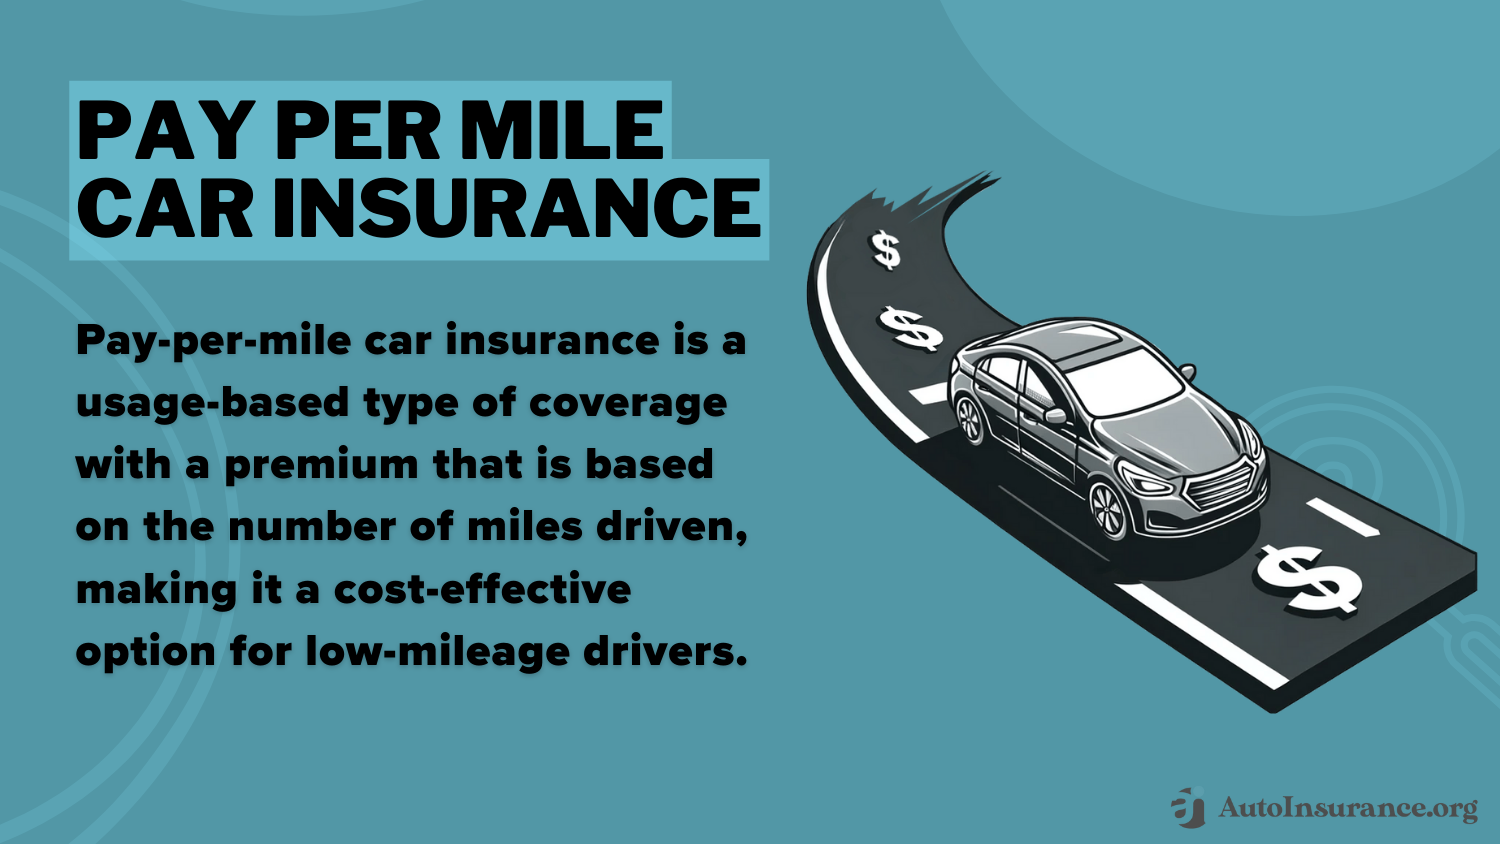 How Annual Mileage Affects Your Auto Insurance Rates: Pay Per Mile Car Insurance Definition Card